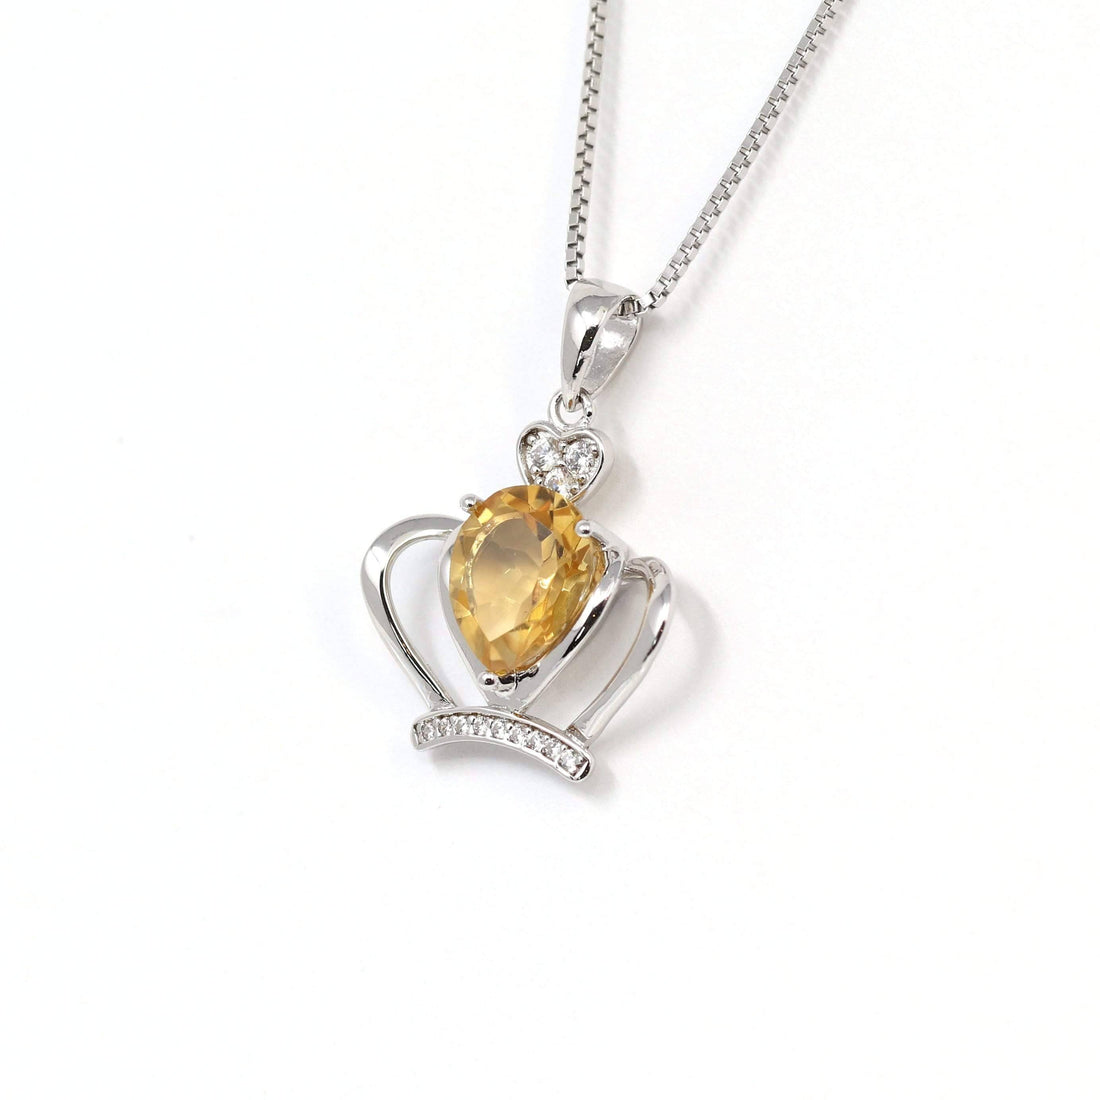 Baikalla Jewelry Silver Citrine Necklace Citrine Baikalla "LOVE Crown" Sterling Silver Natural Crown Amethyst Necklace With CZ